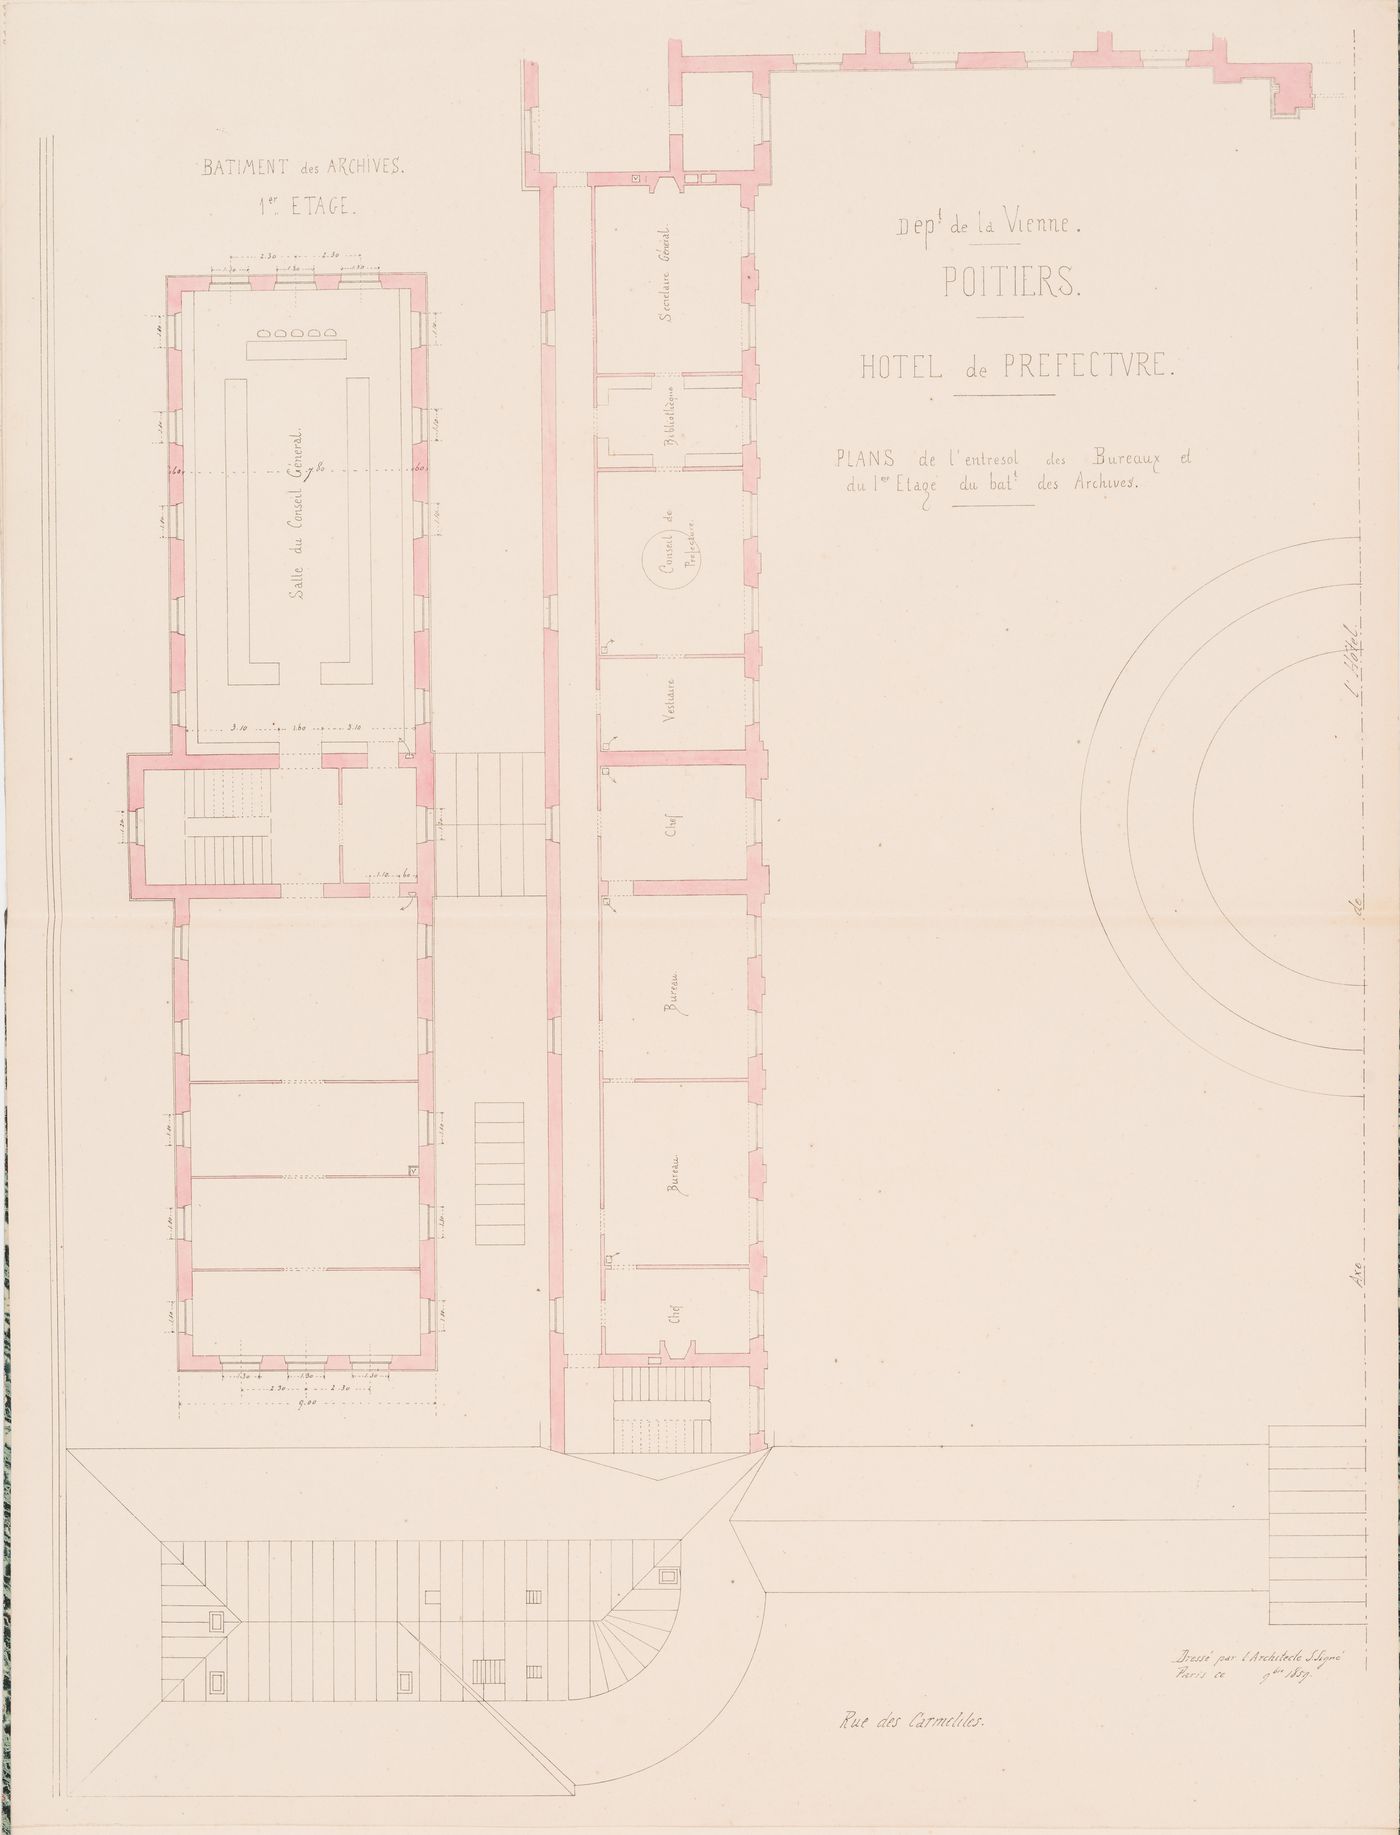 Project for a Hôtel de préfecture, Poitiers: Plans for the "entresol" for the offices and the first floor for the Archives building